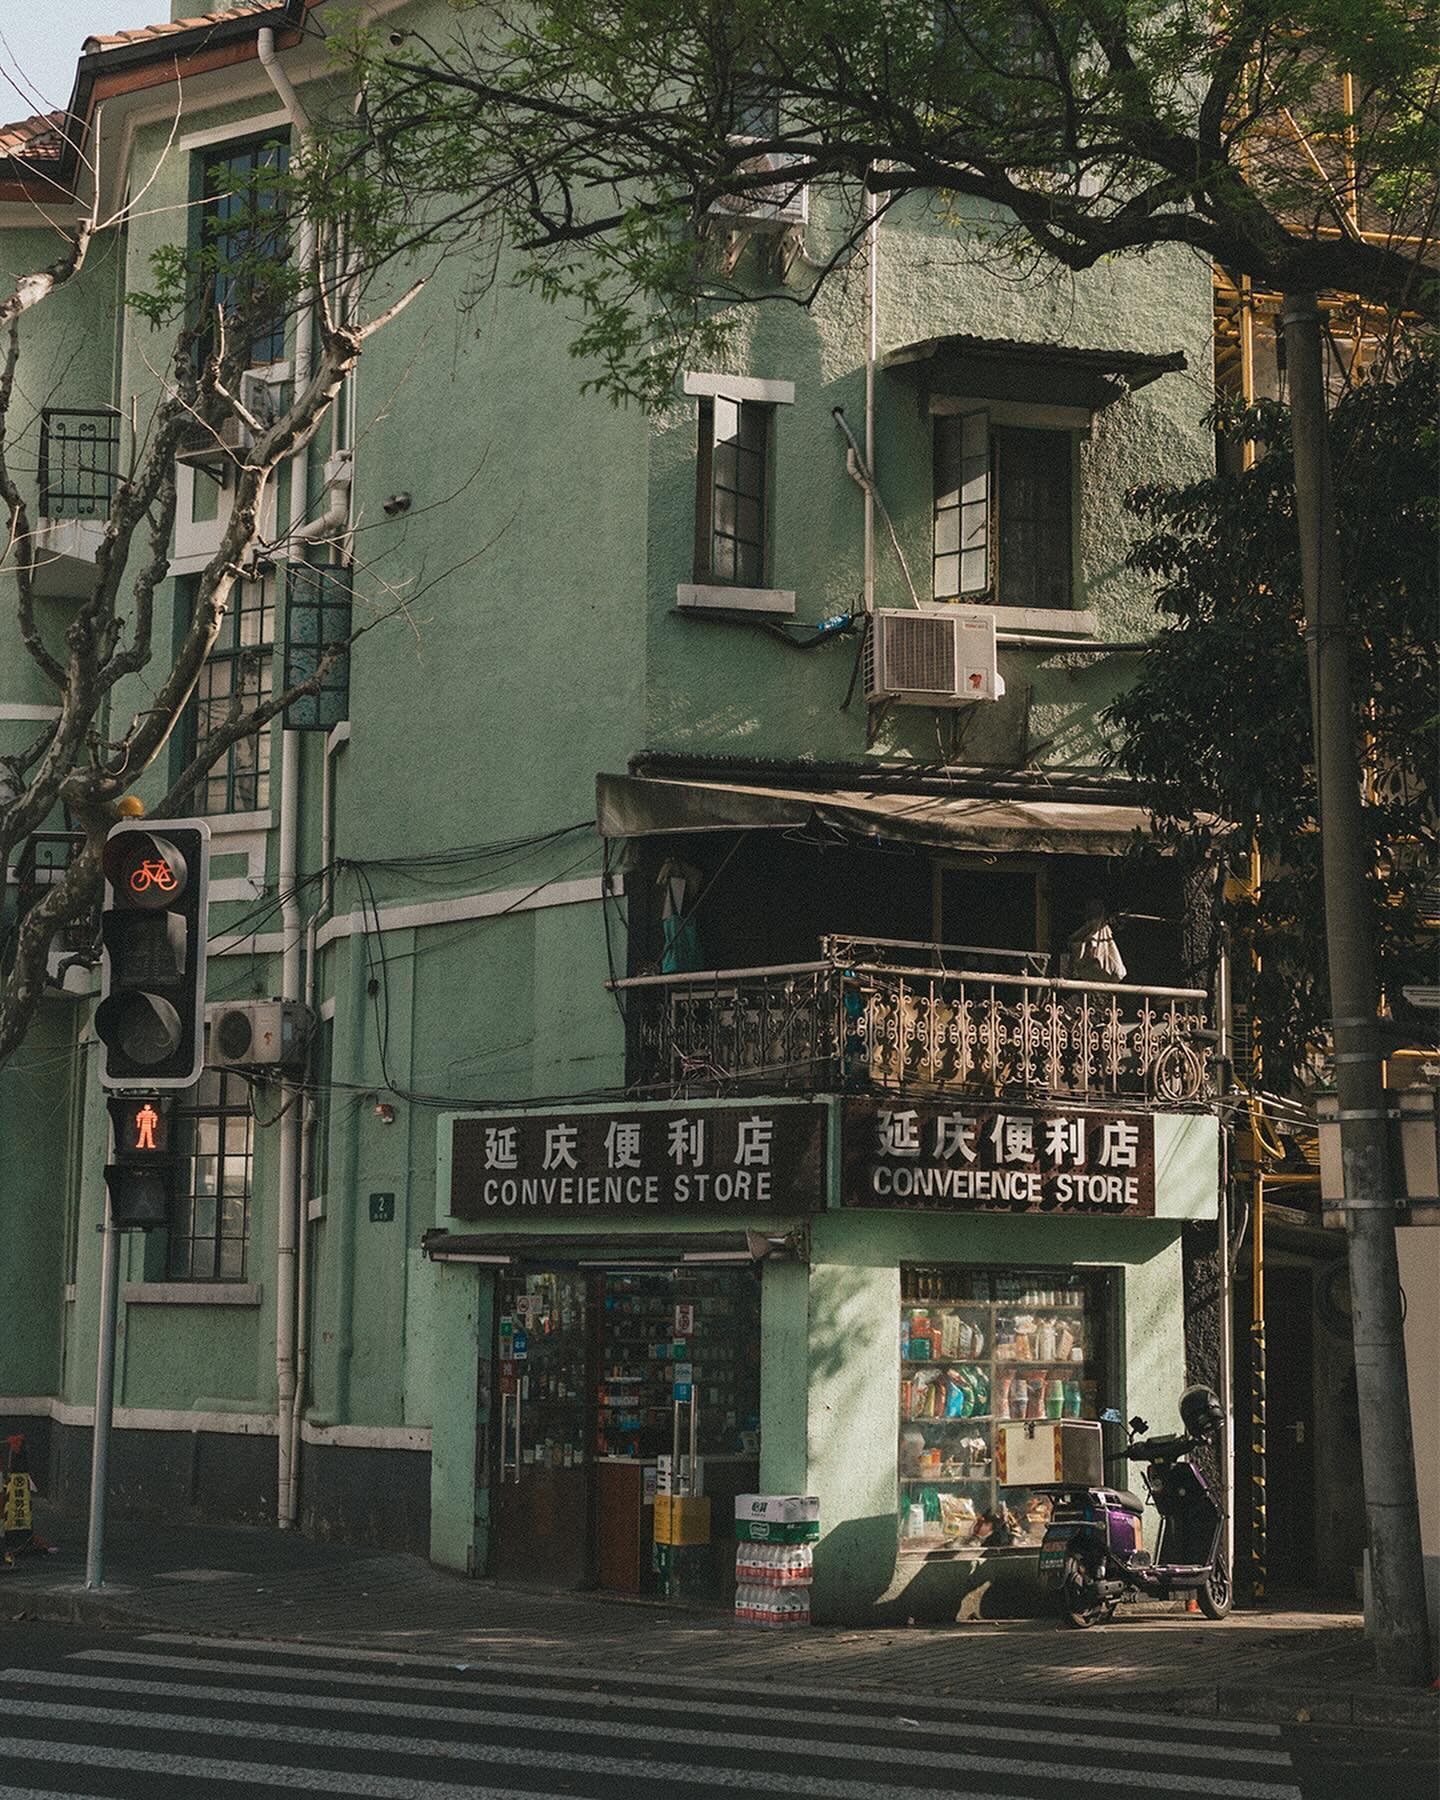 Another set of Shanghai streets featuring the gorgeous glow✨

Can&rsquo;t wait to explore more of this beautiful city soon..? 🥹